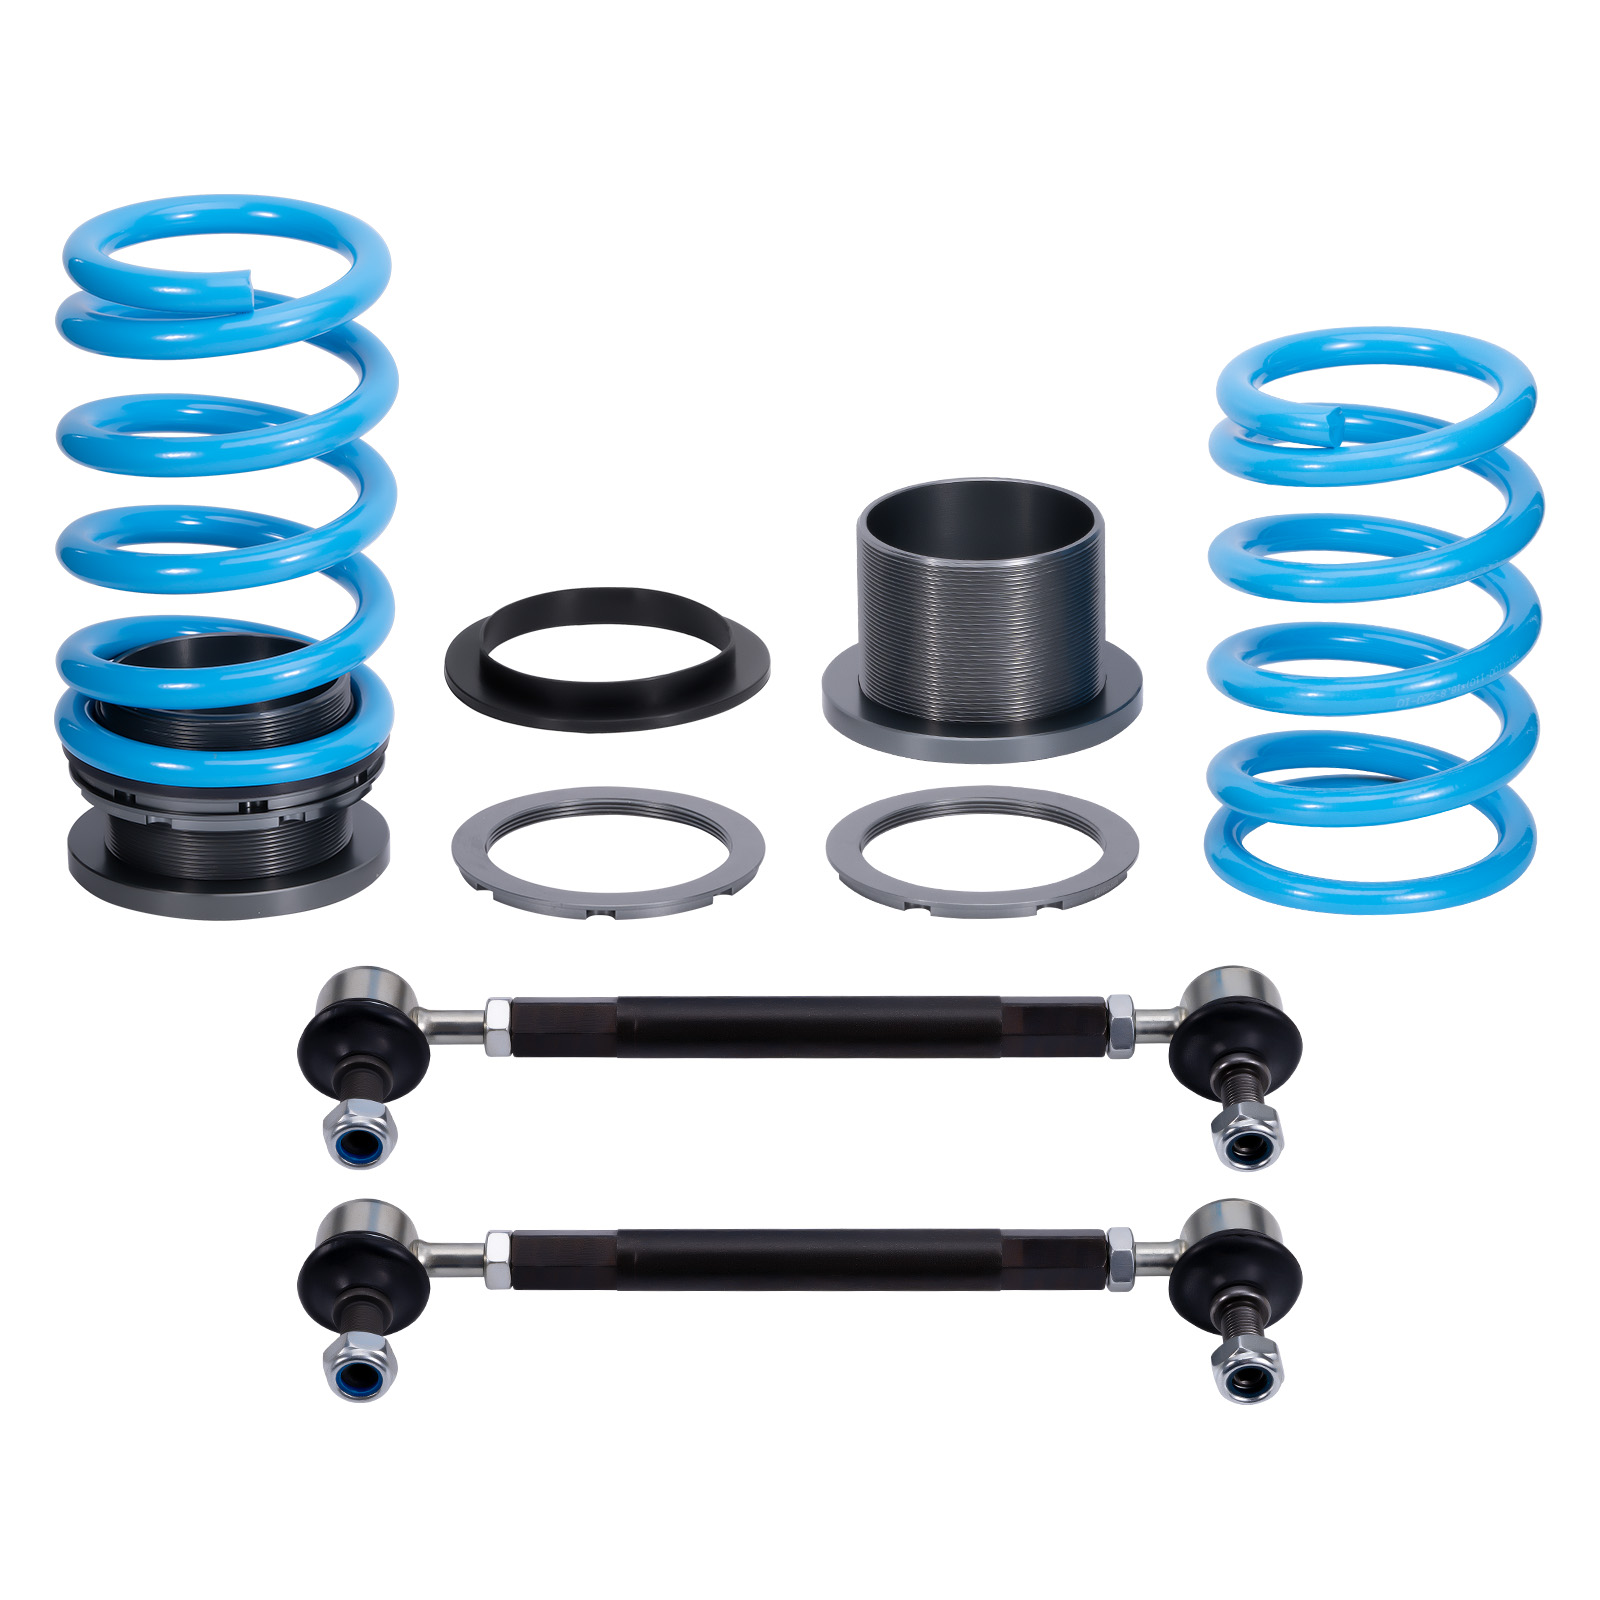 MaXpeedingRods Blog | An Automotive Blog from MaXpeedingRods - How to Choose Spring Rate for Coilovers